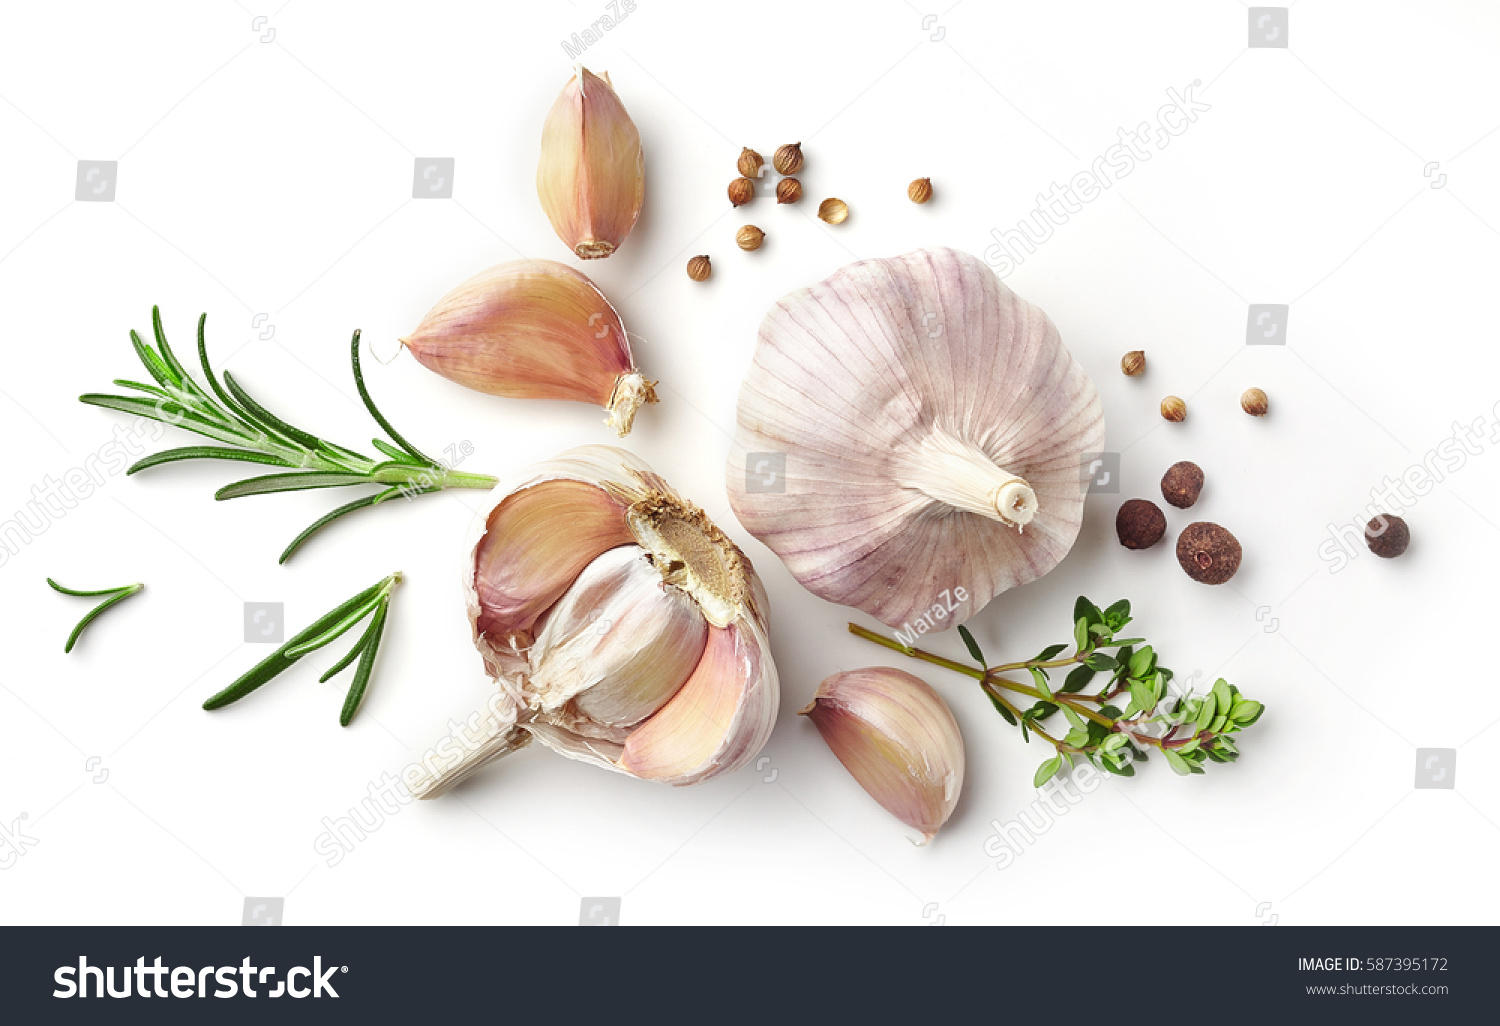 garlic and herbs isolated on white background, top view #587395172